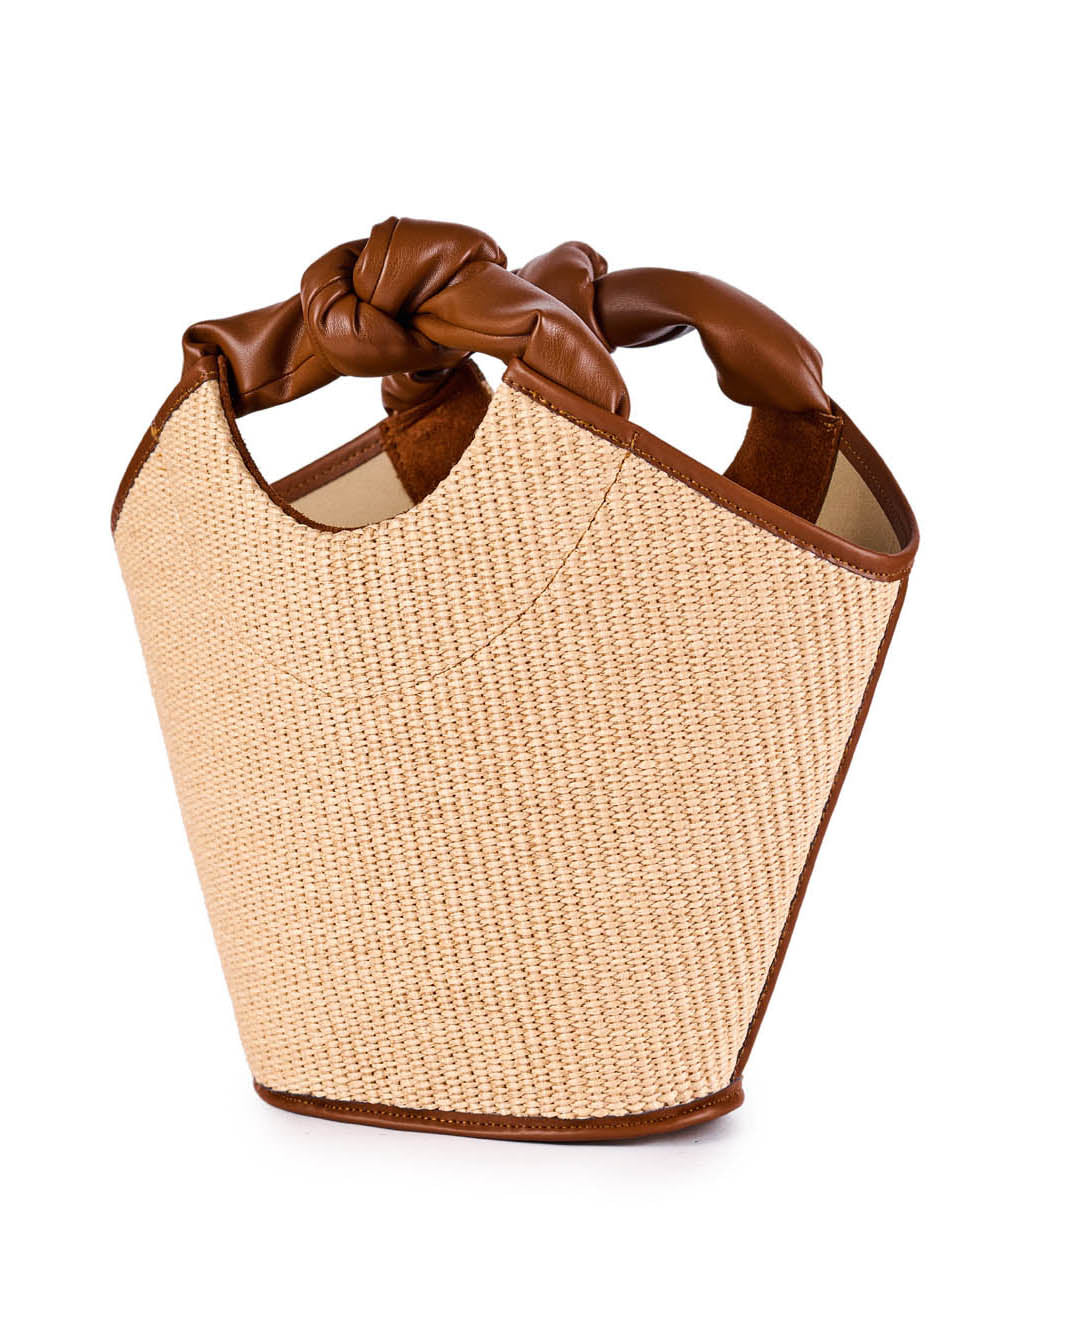 Beige woven tote bag with brown leather handles and trim